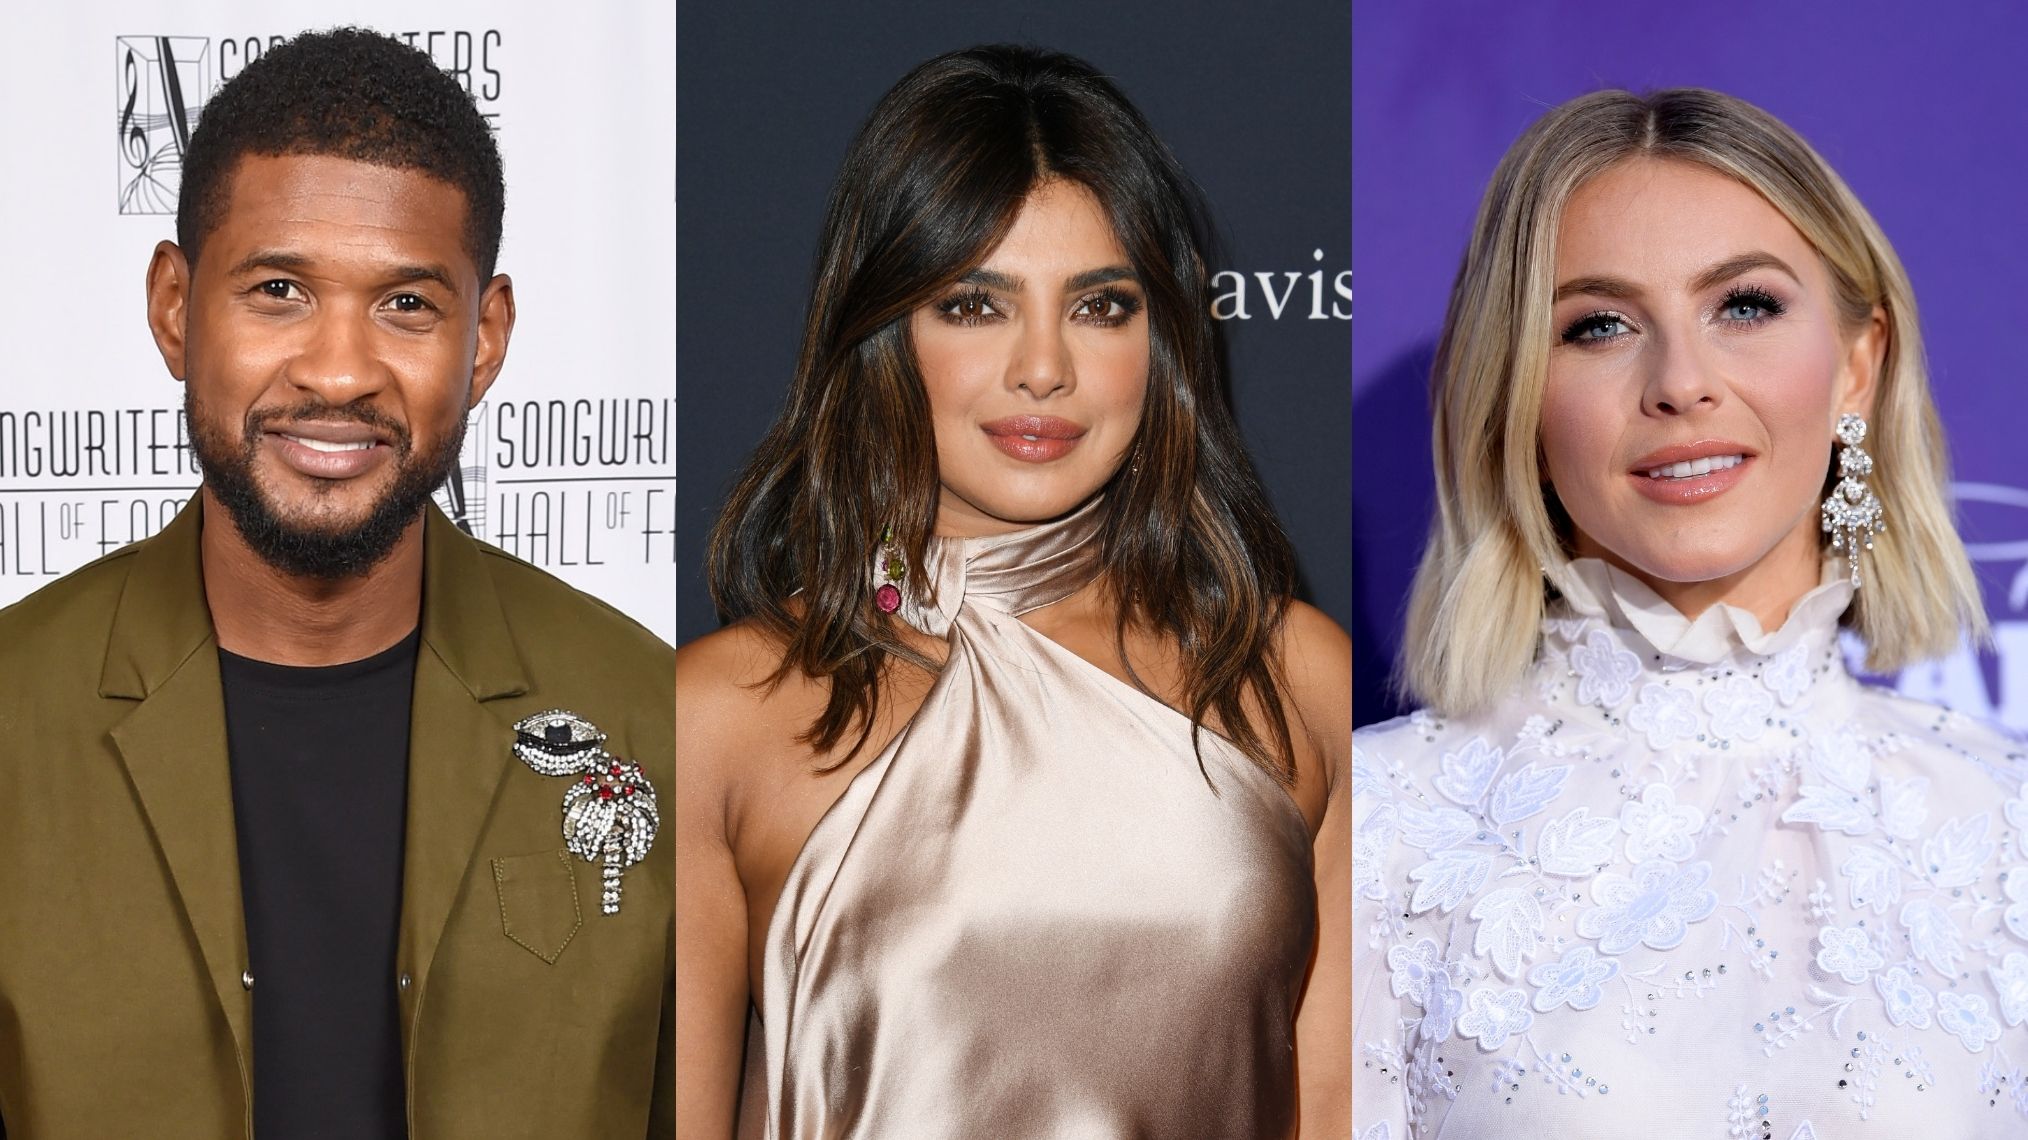 Priyanka Chopra and Usher with Julianne Hough to co-host The Activist